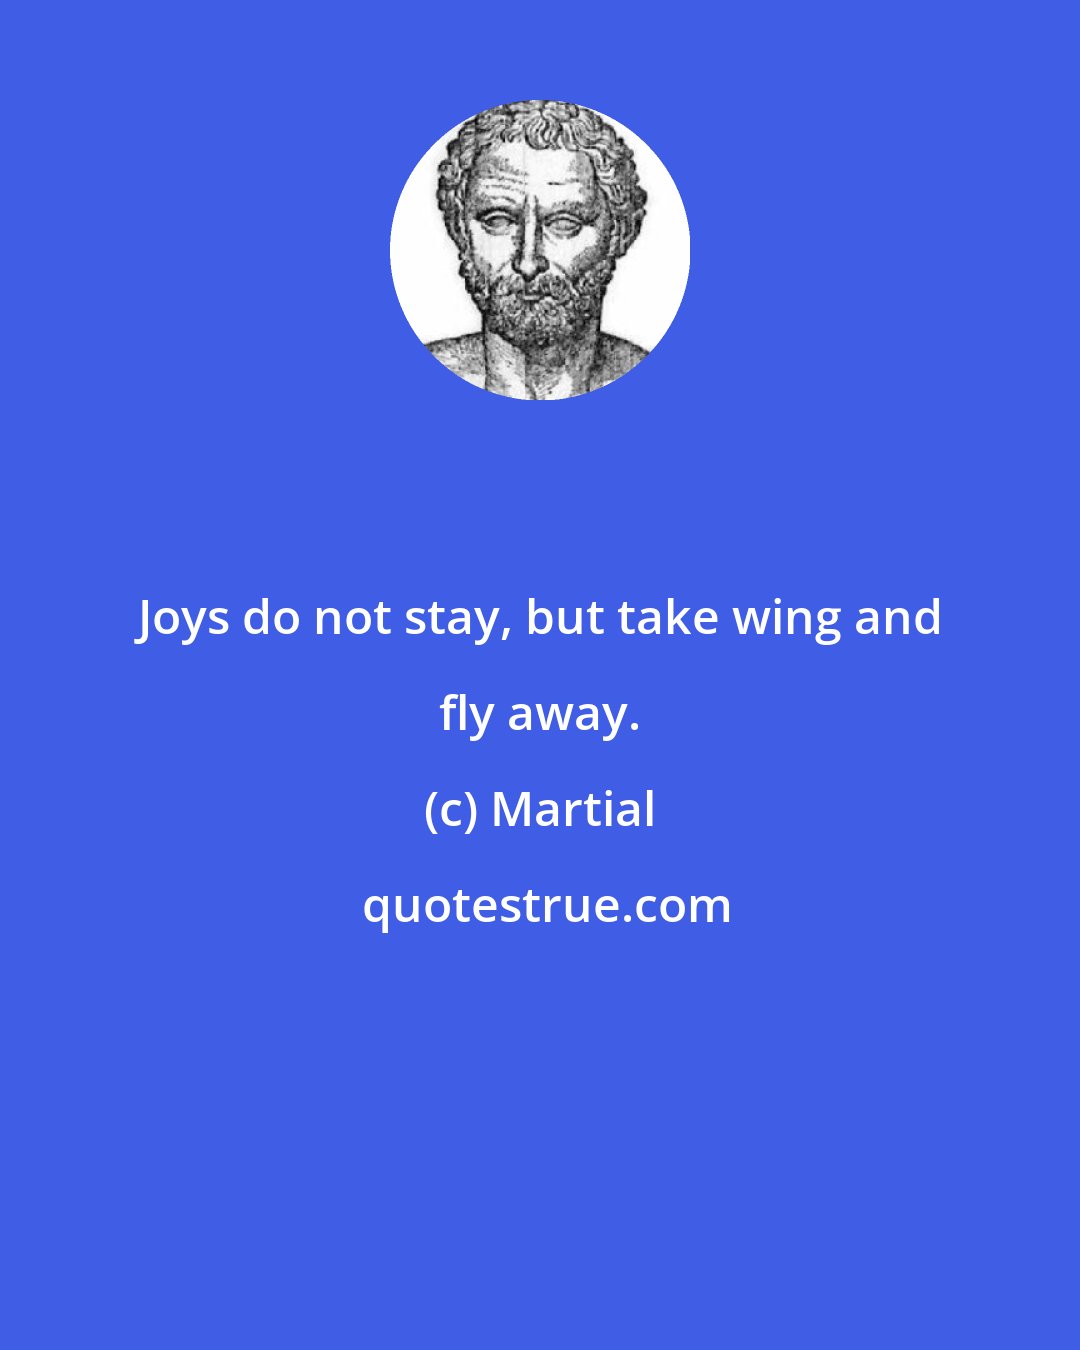 Martial: Joys do not stay, but take wing and fly away.